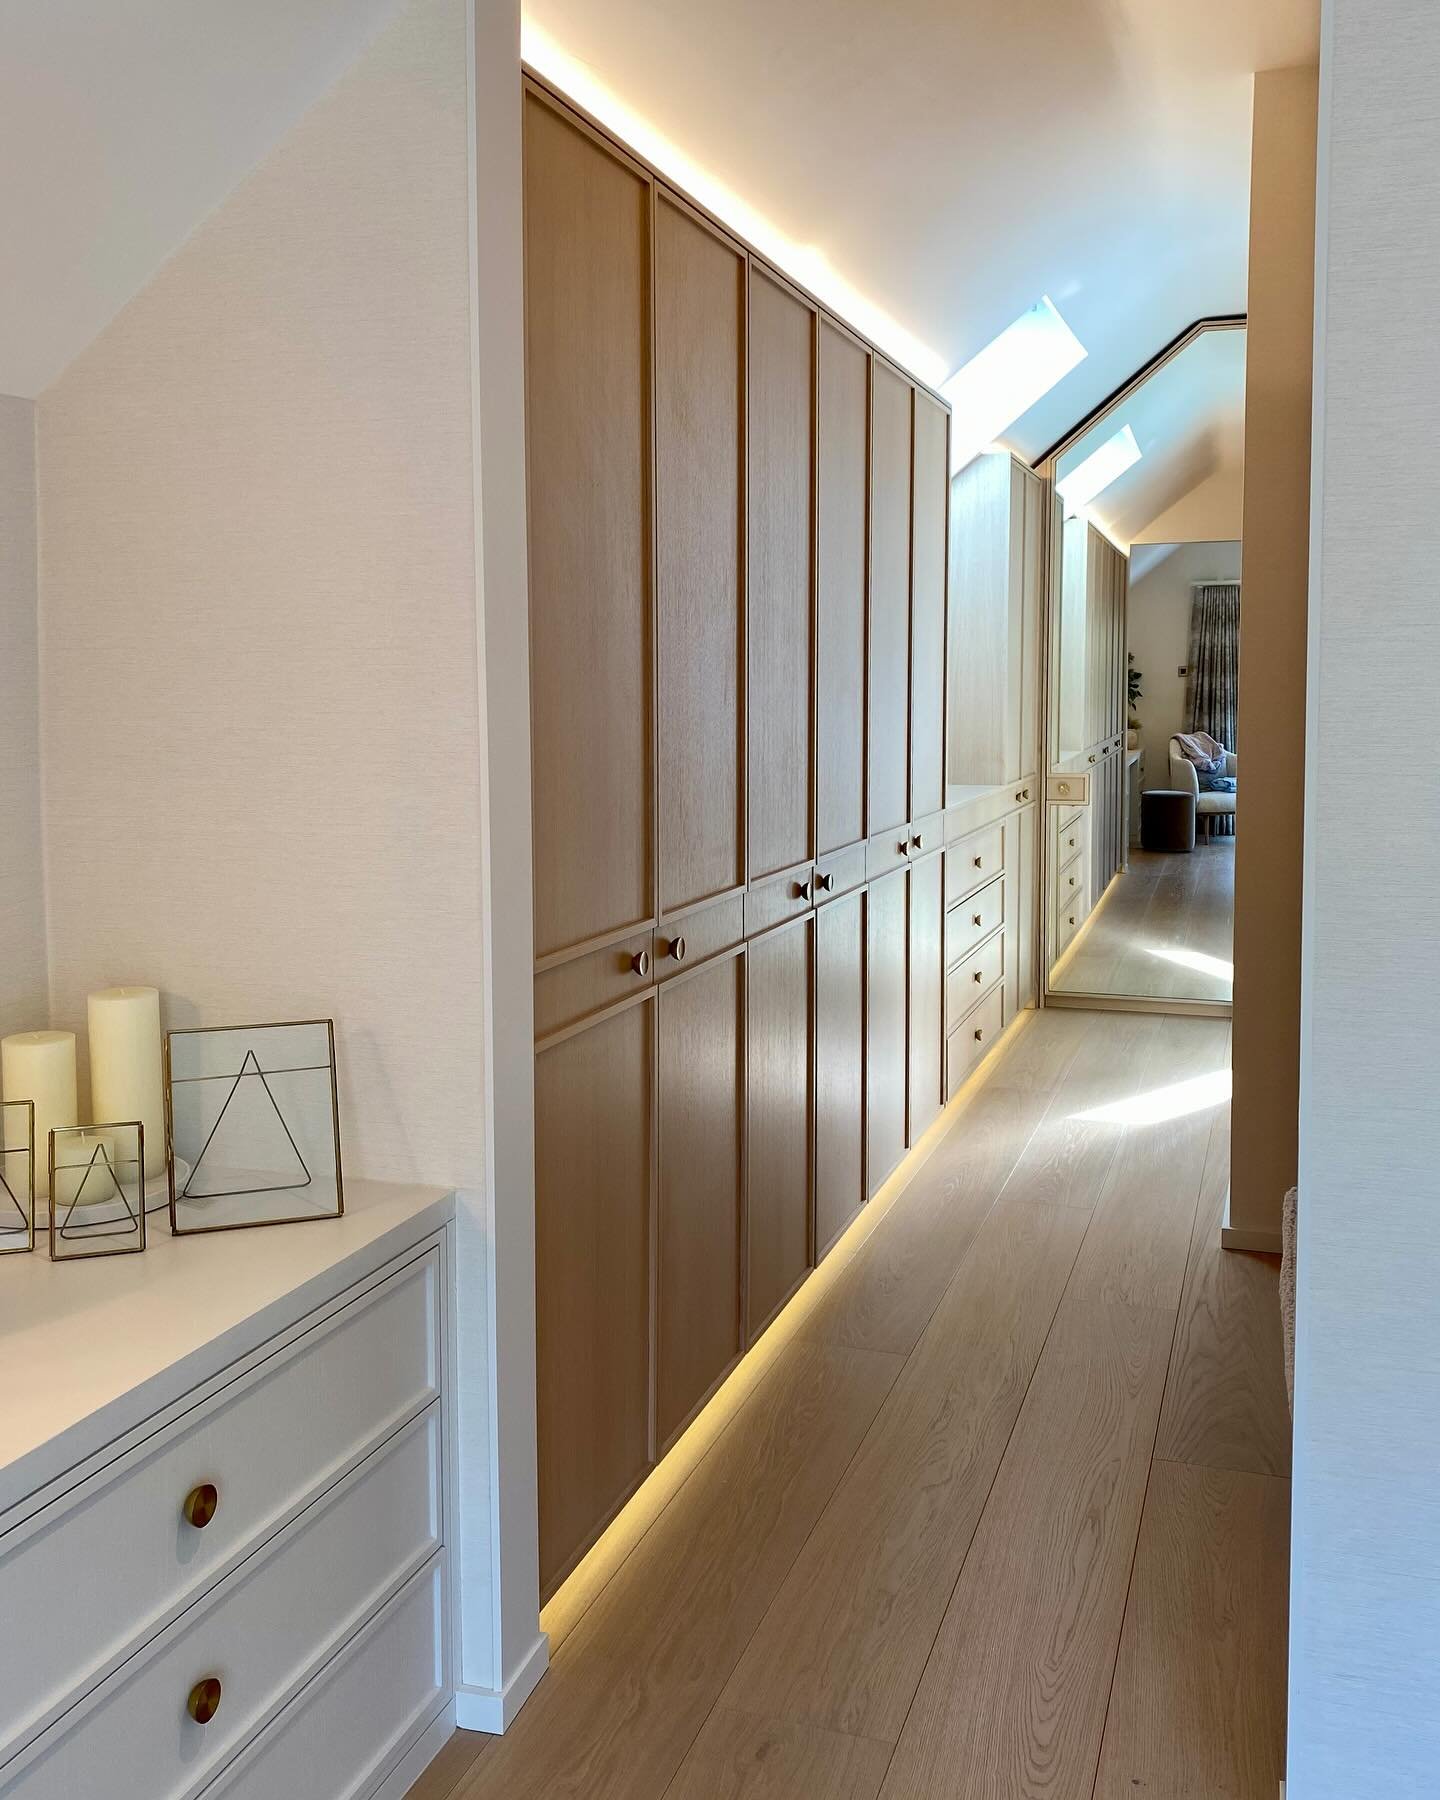 This beautiful dressing room was part of a master bedroom project we worked on recently. The doors are are in a light stained Oak and the large mirrored door creates an open and light feel.

Interior Designer @falchiinteriors 
.
.
.
#bespokedressingr